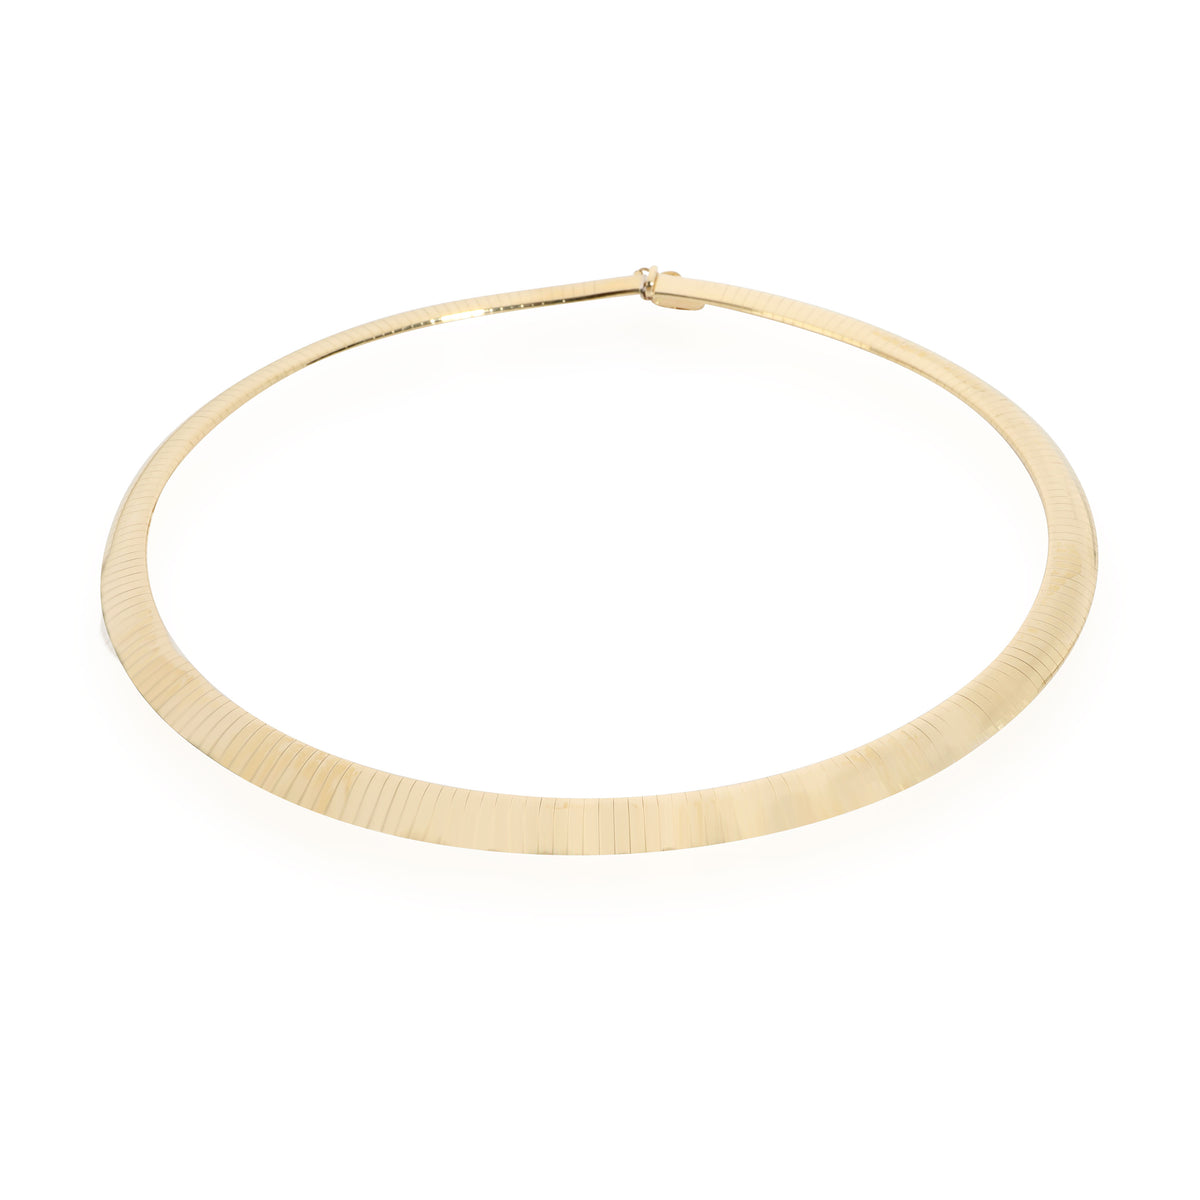 Vintage Omega-Style Choker Necklace in 14K Yellow Gold